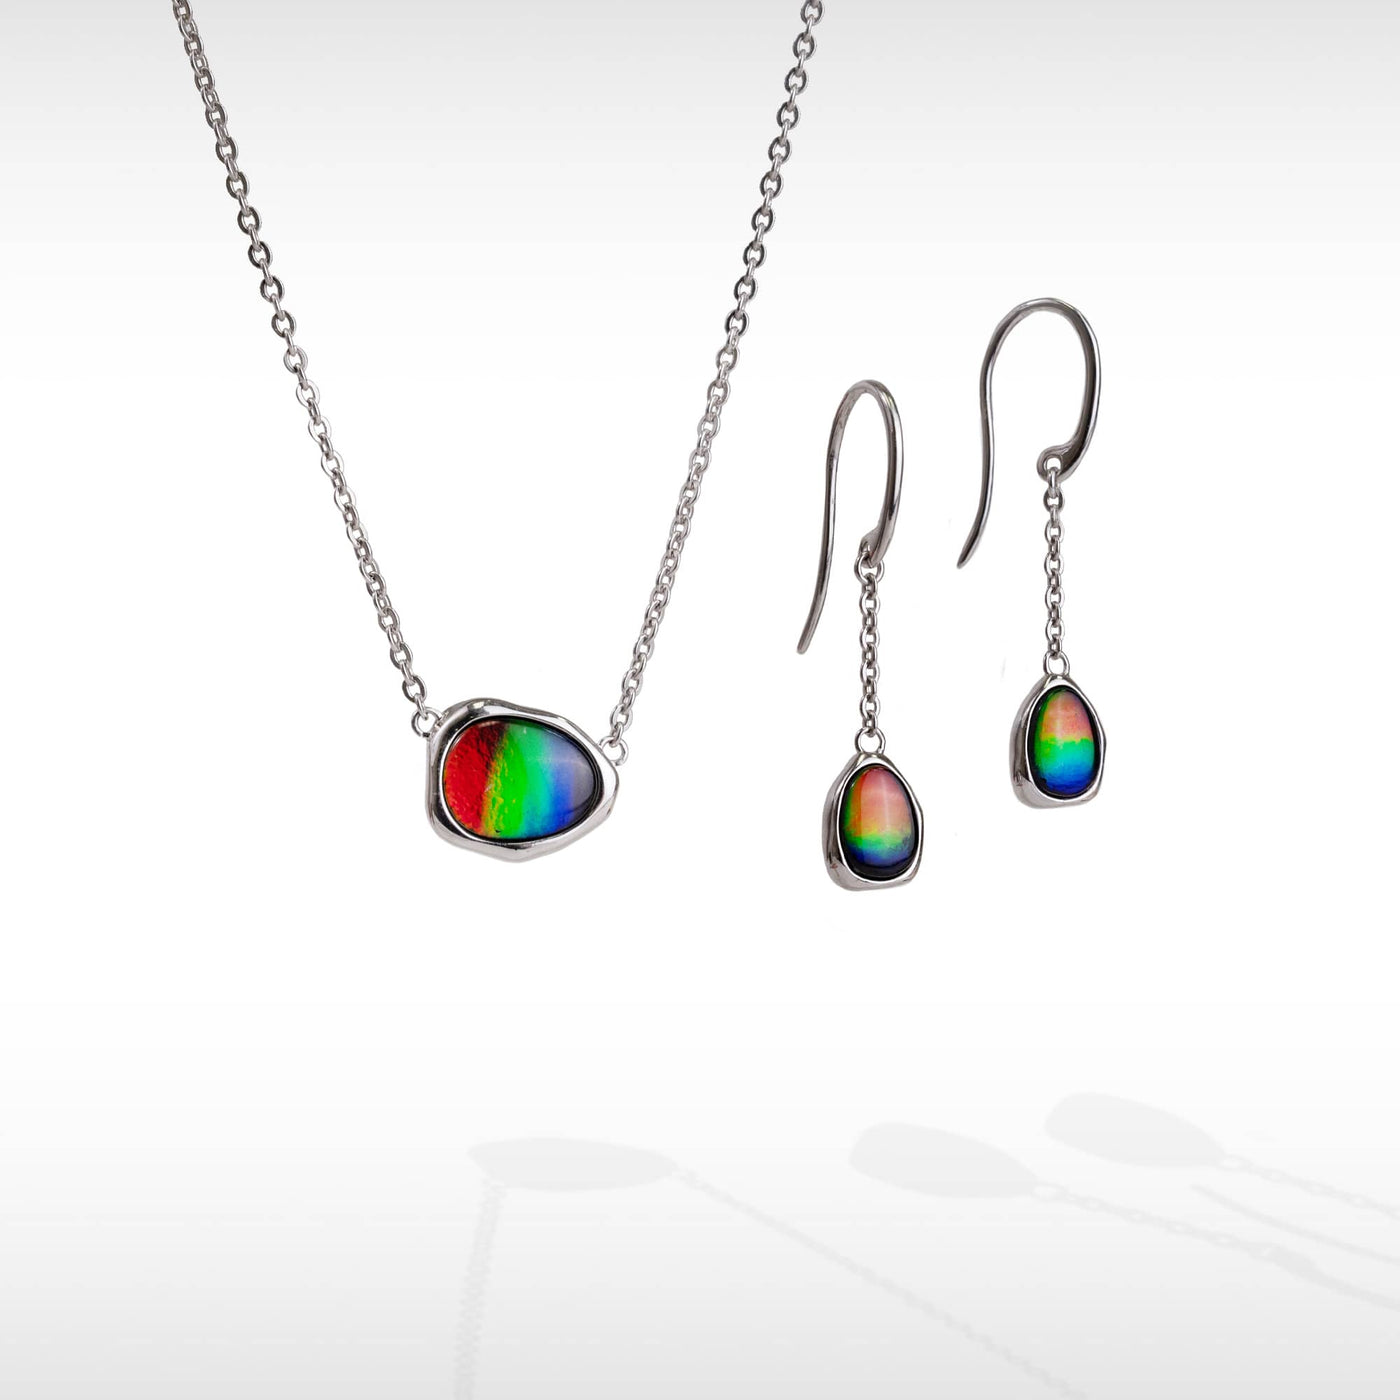 Organic ammolite pendant and earring set in sterling silver